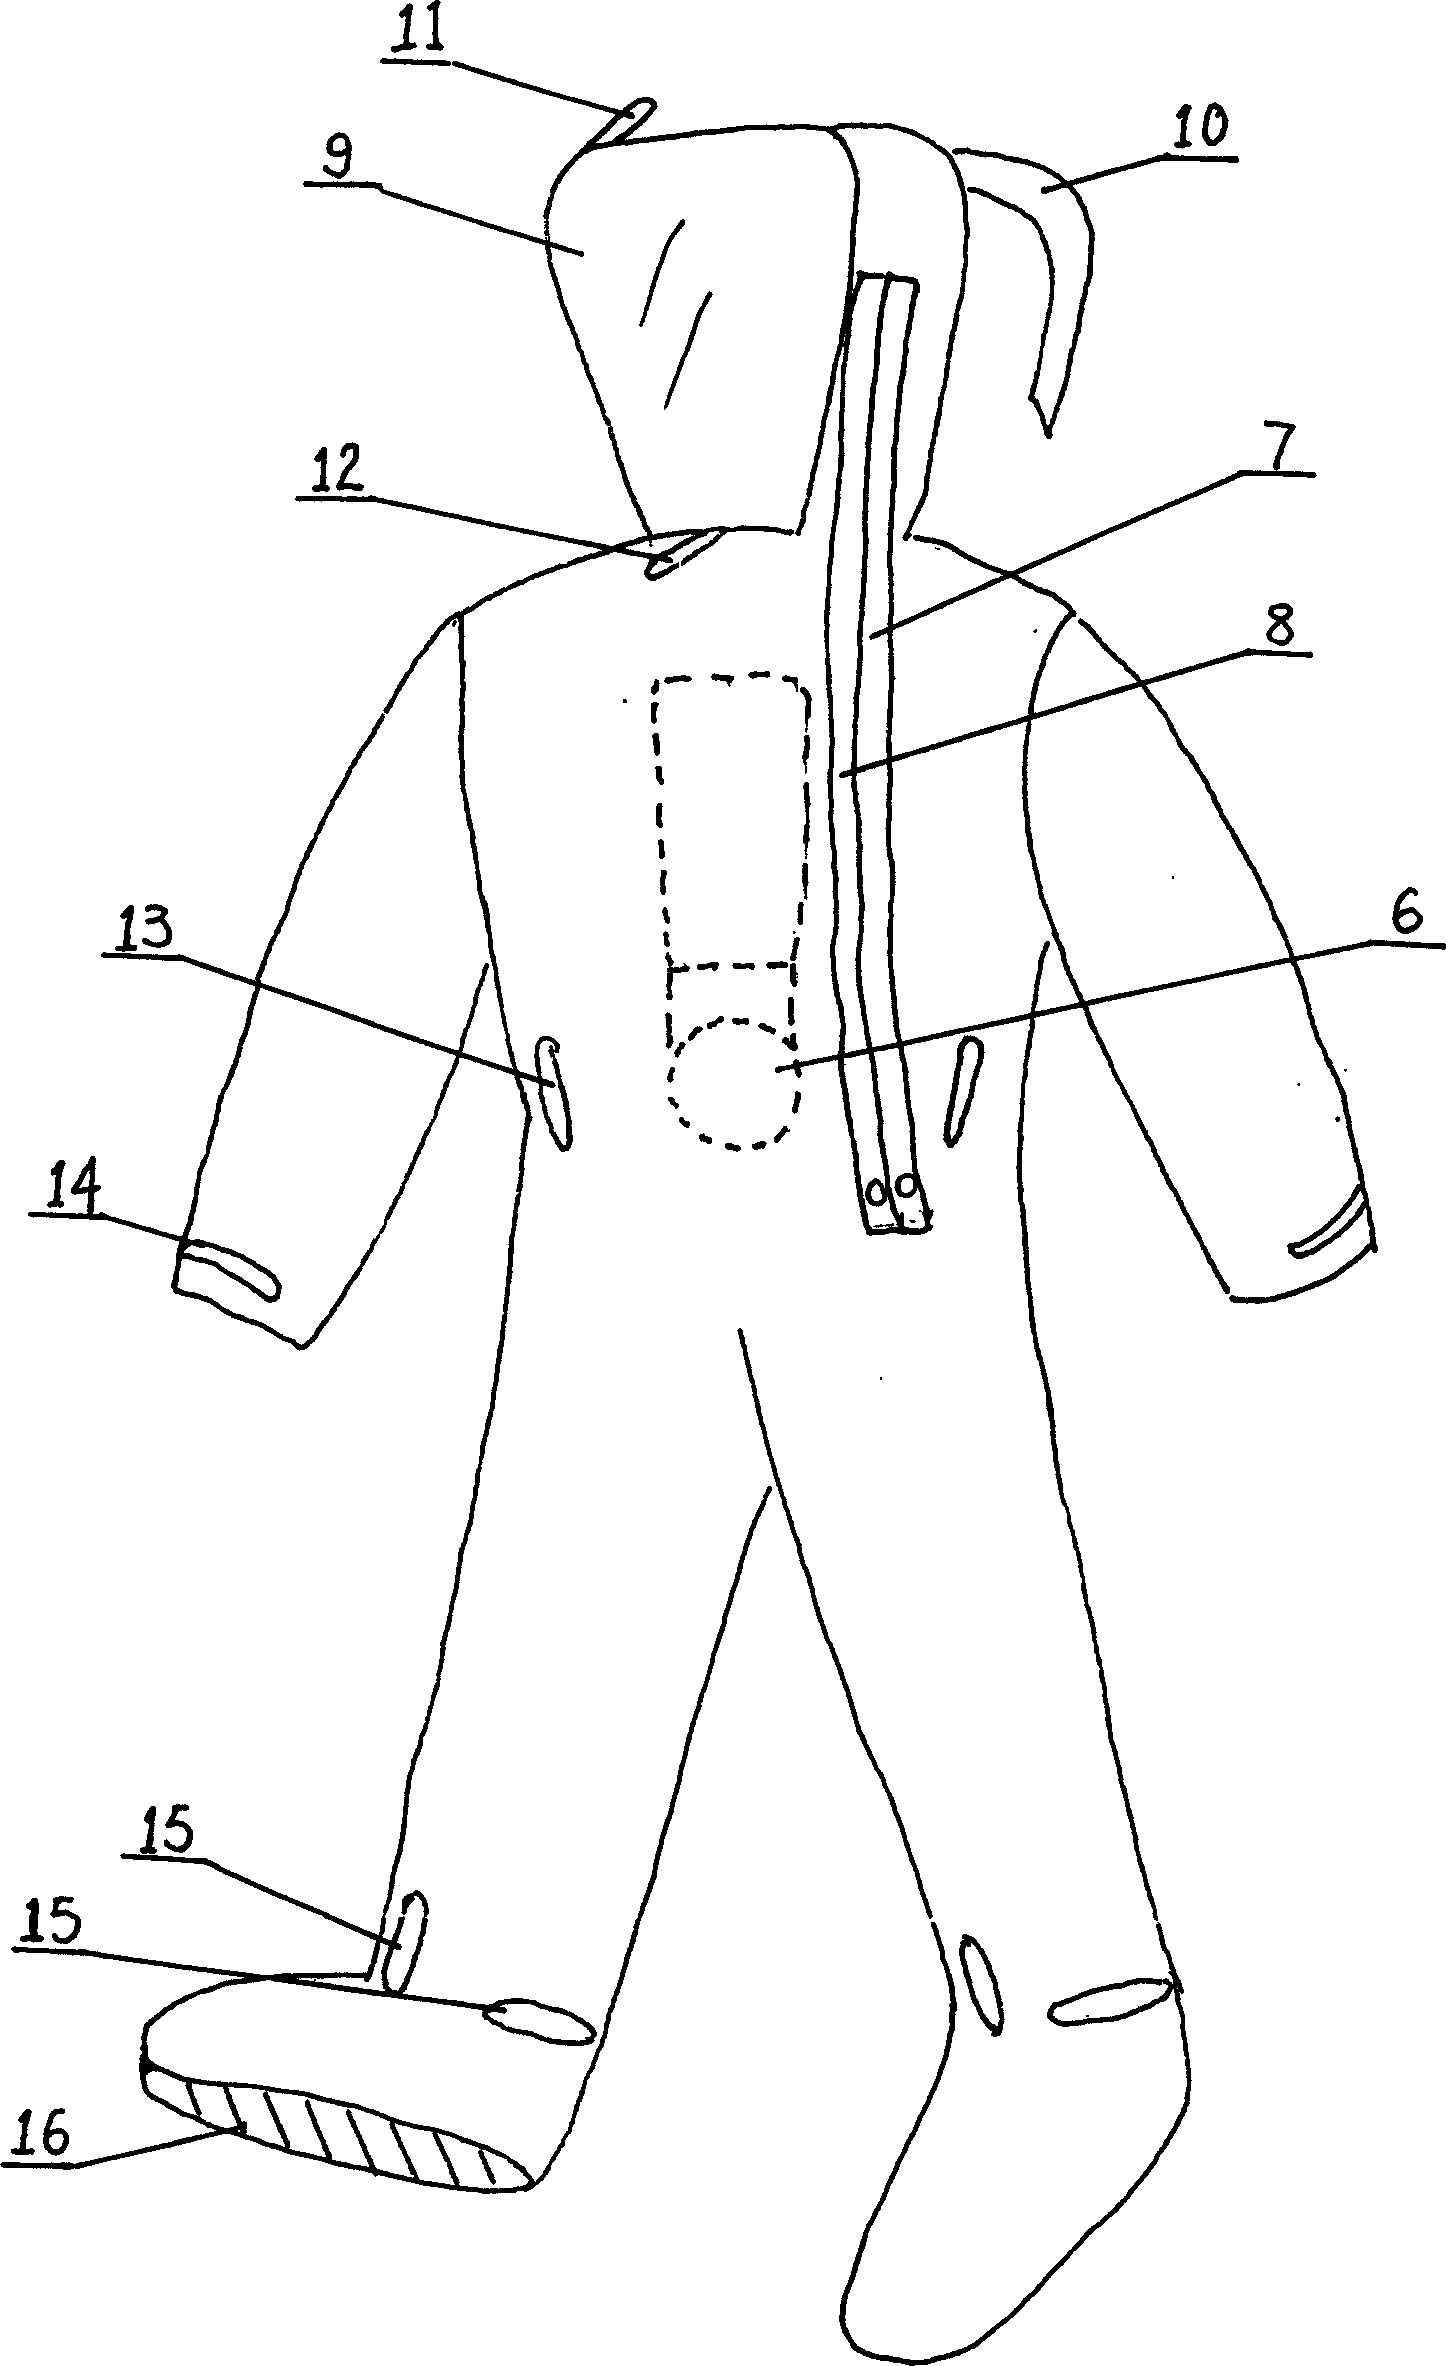 Enclosed integrated protective garment